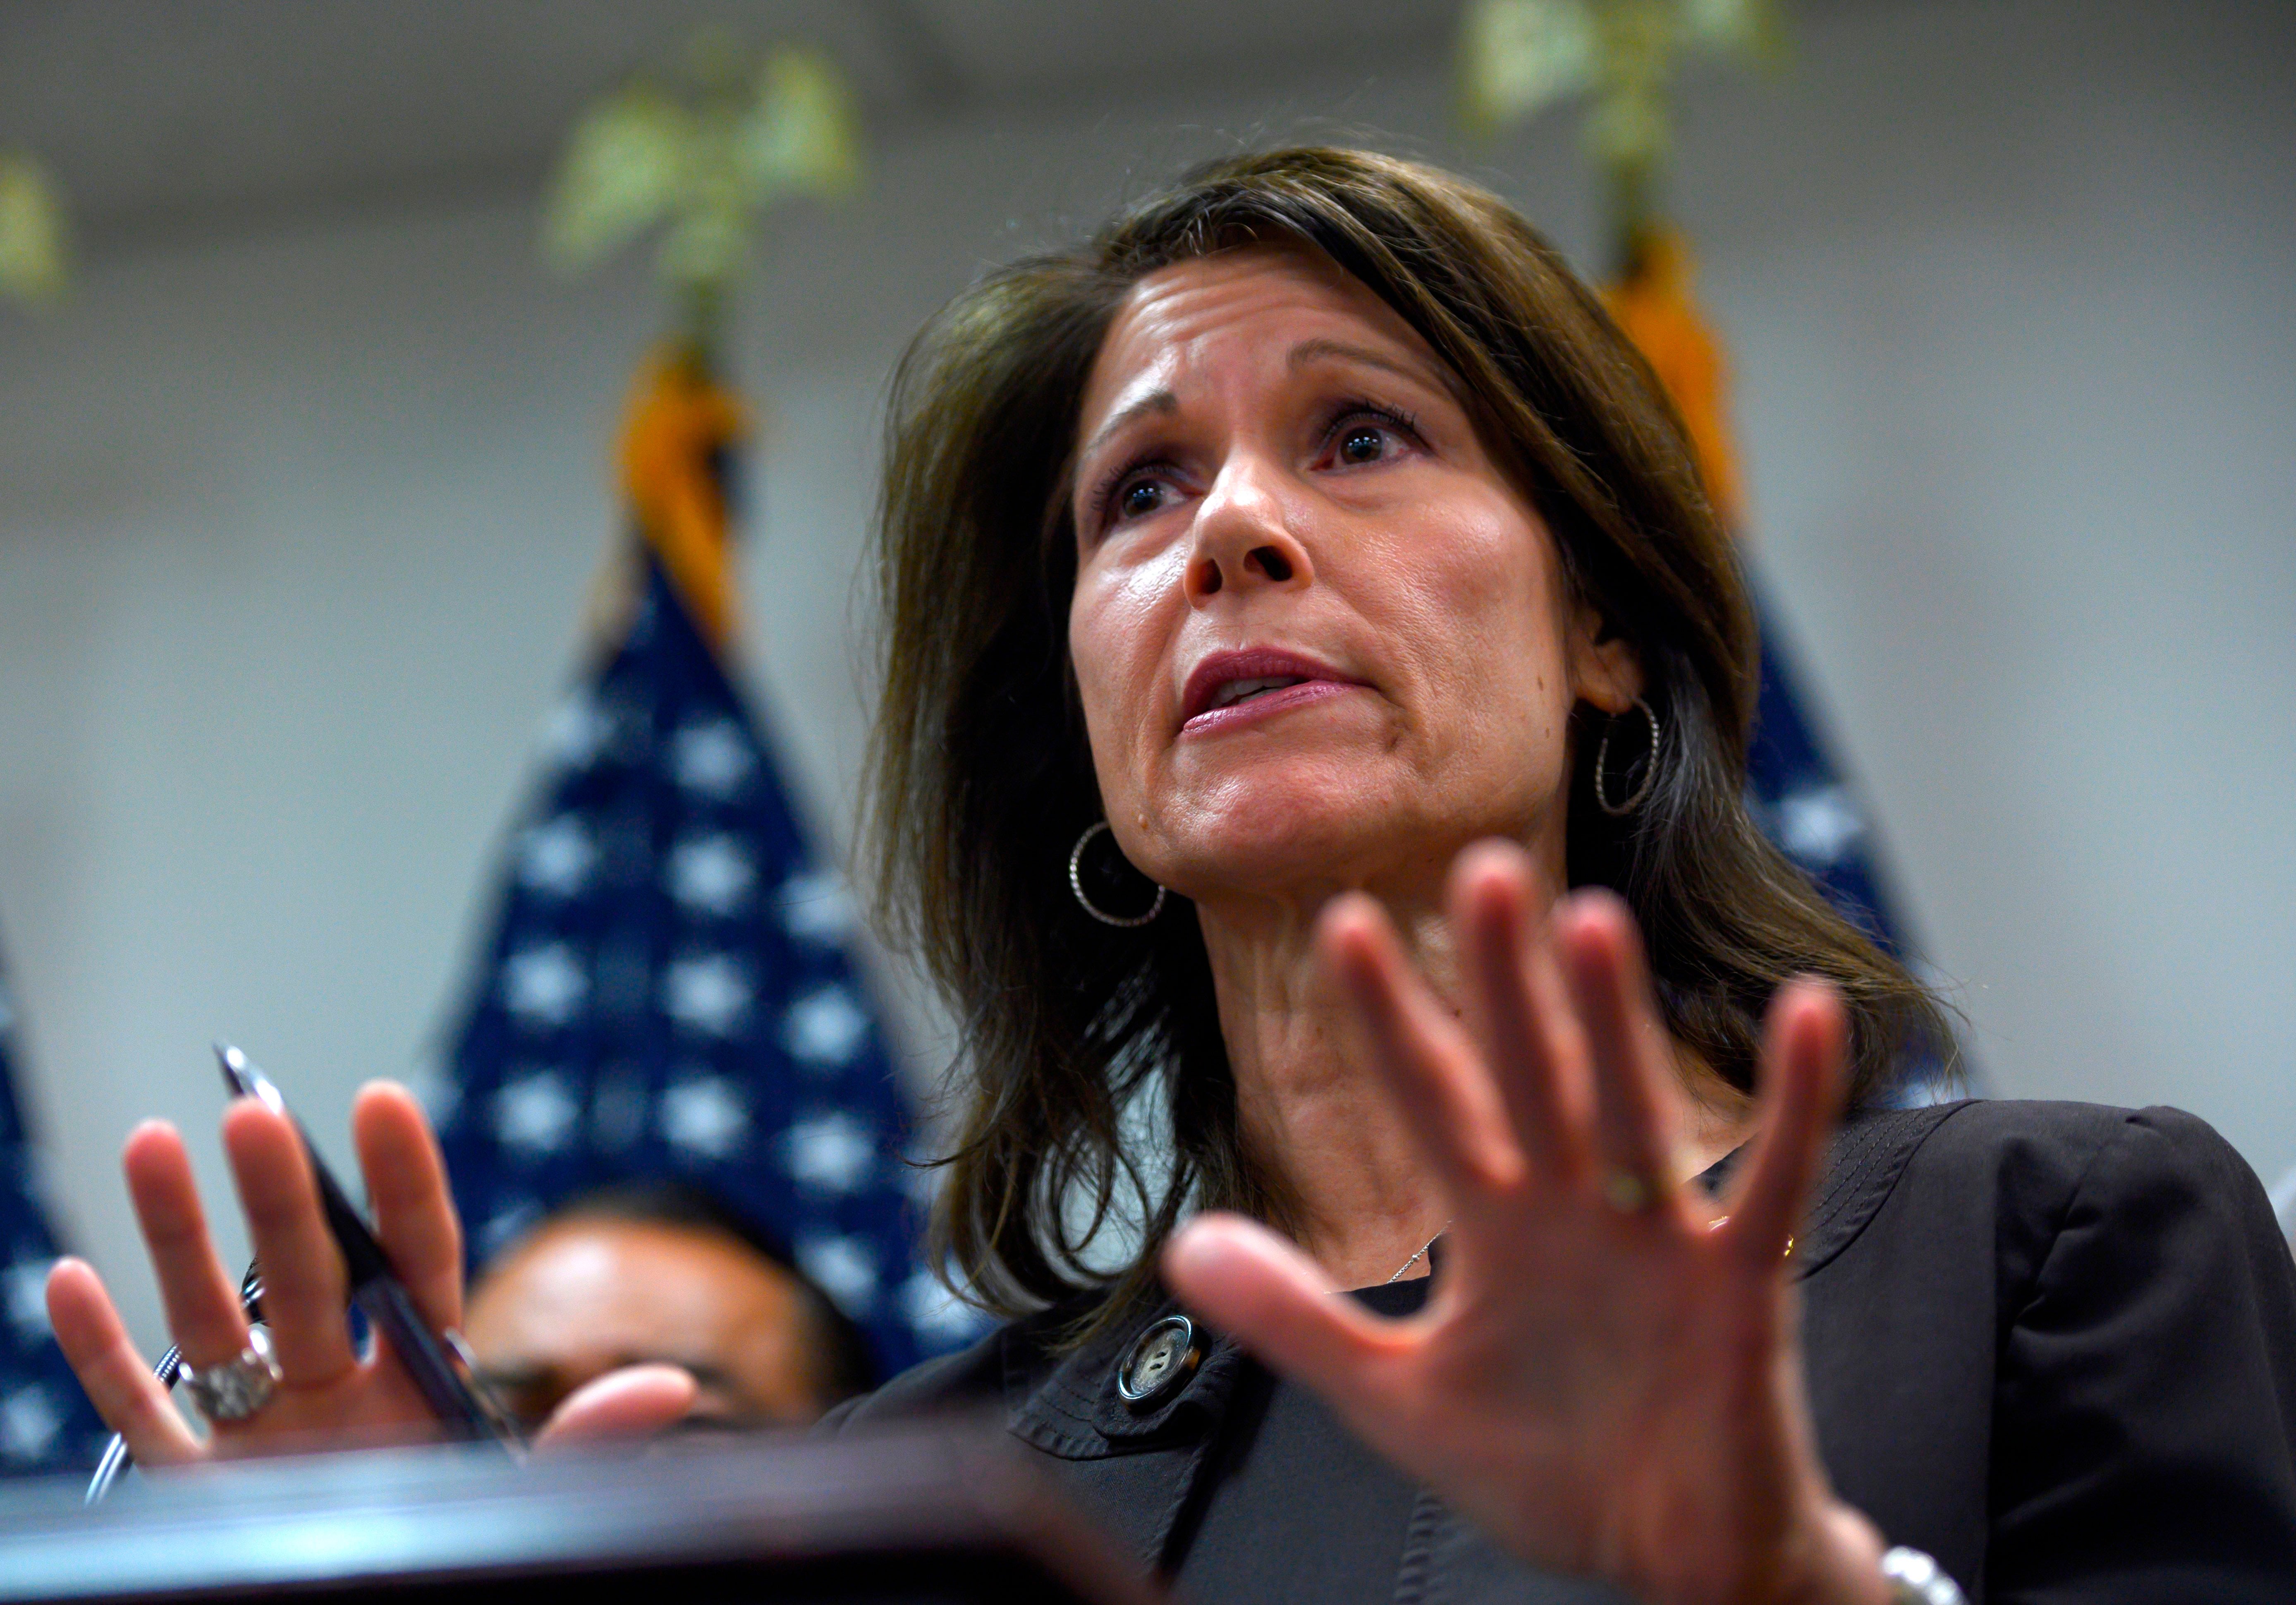 Rep Cheri Bustos ran the Democratic Congressional Campaign Committee in the 2020 cycle, often seen as a stepping stone to move up in the ranks.